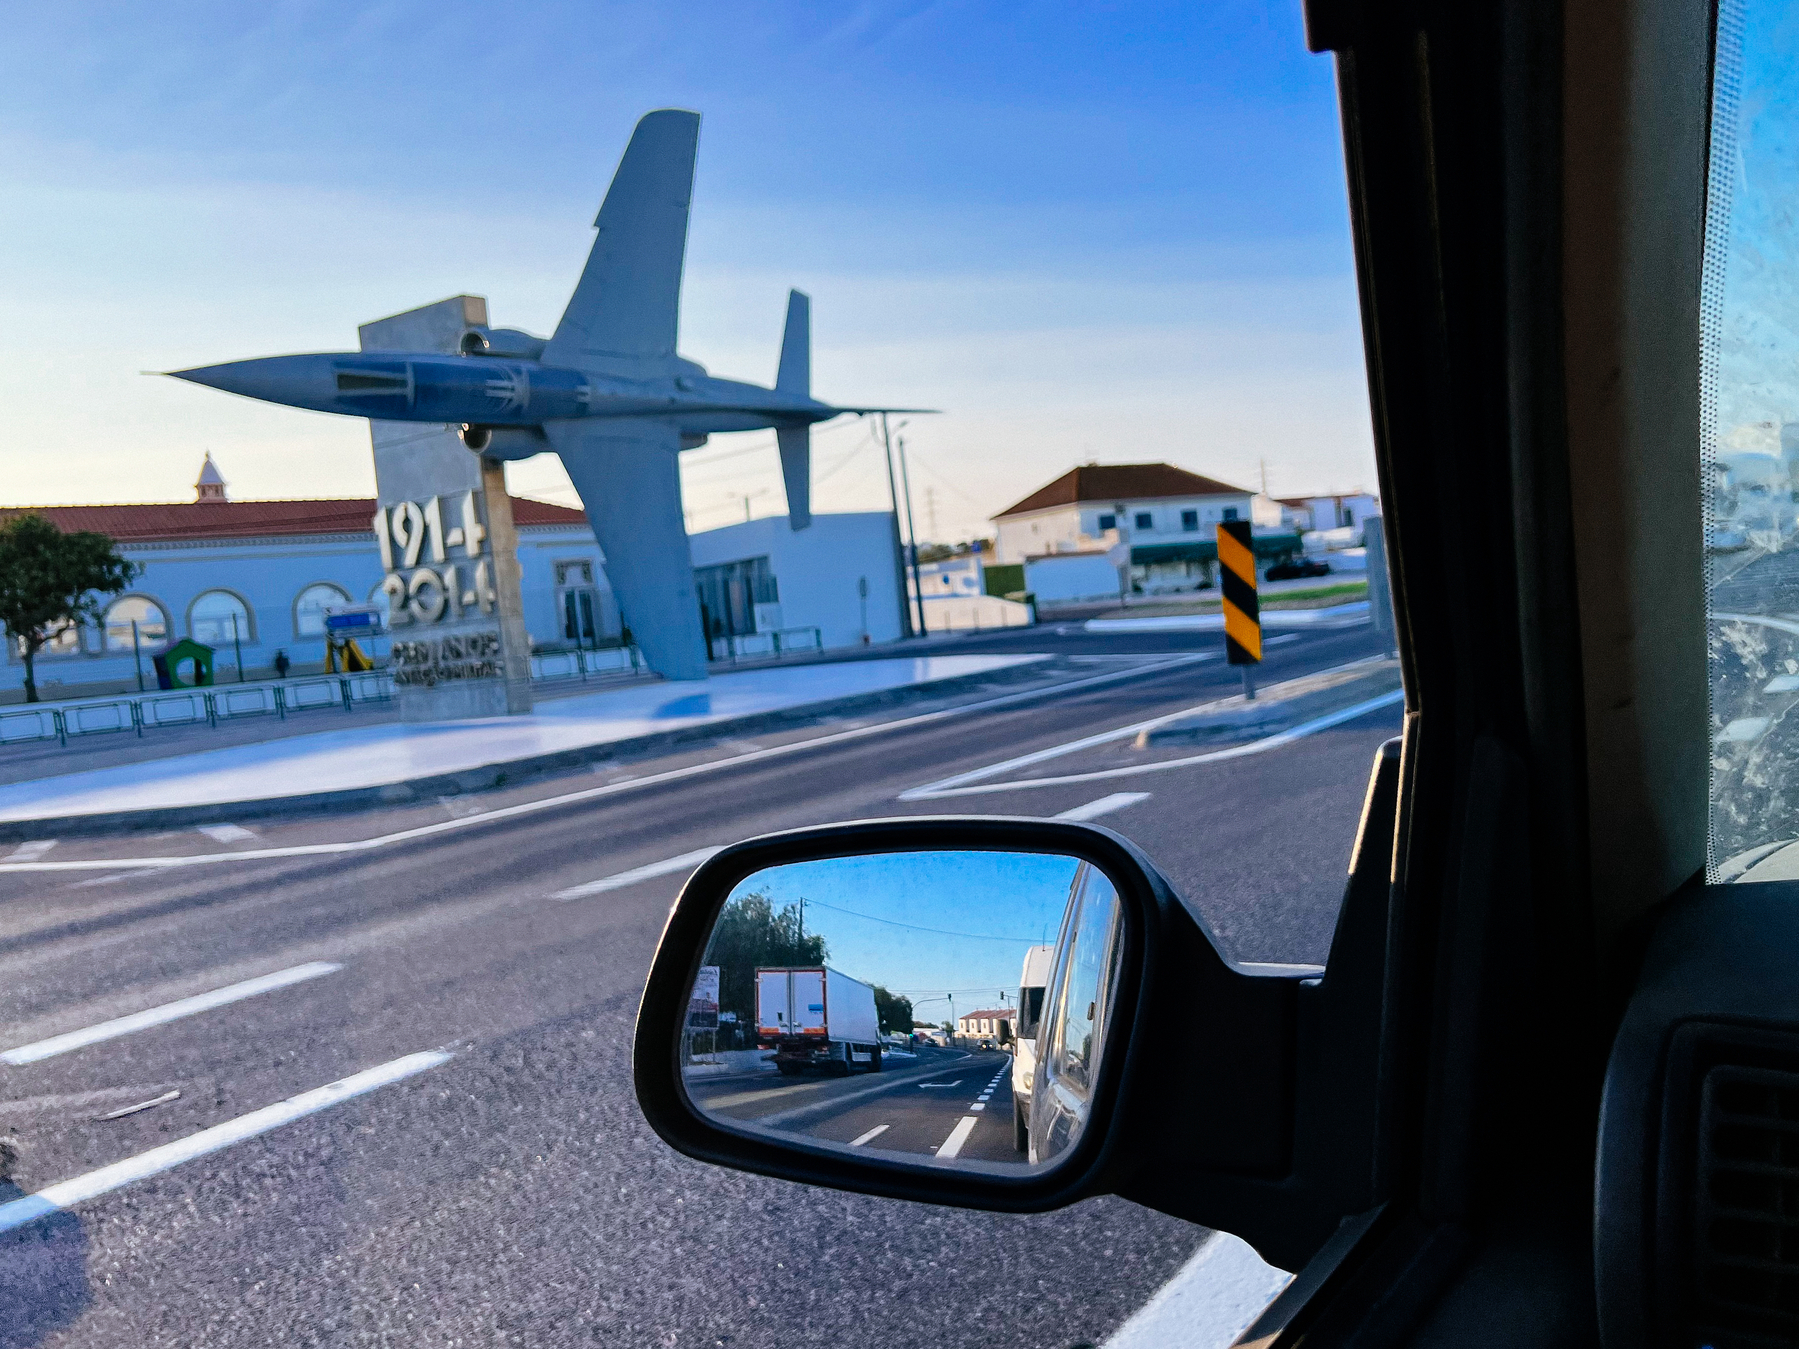 A fighter jet by the side of the road, seen from inside a car. 